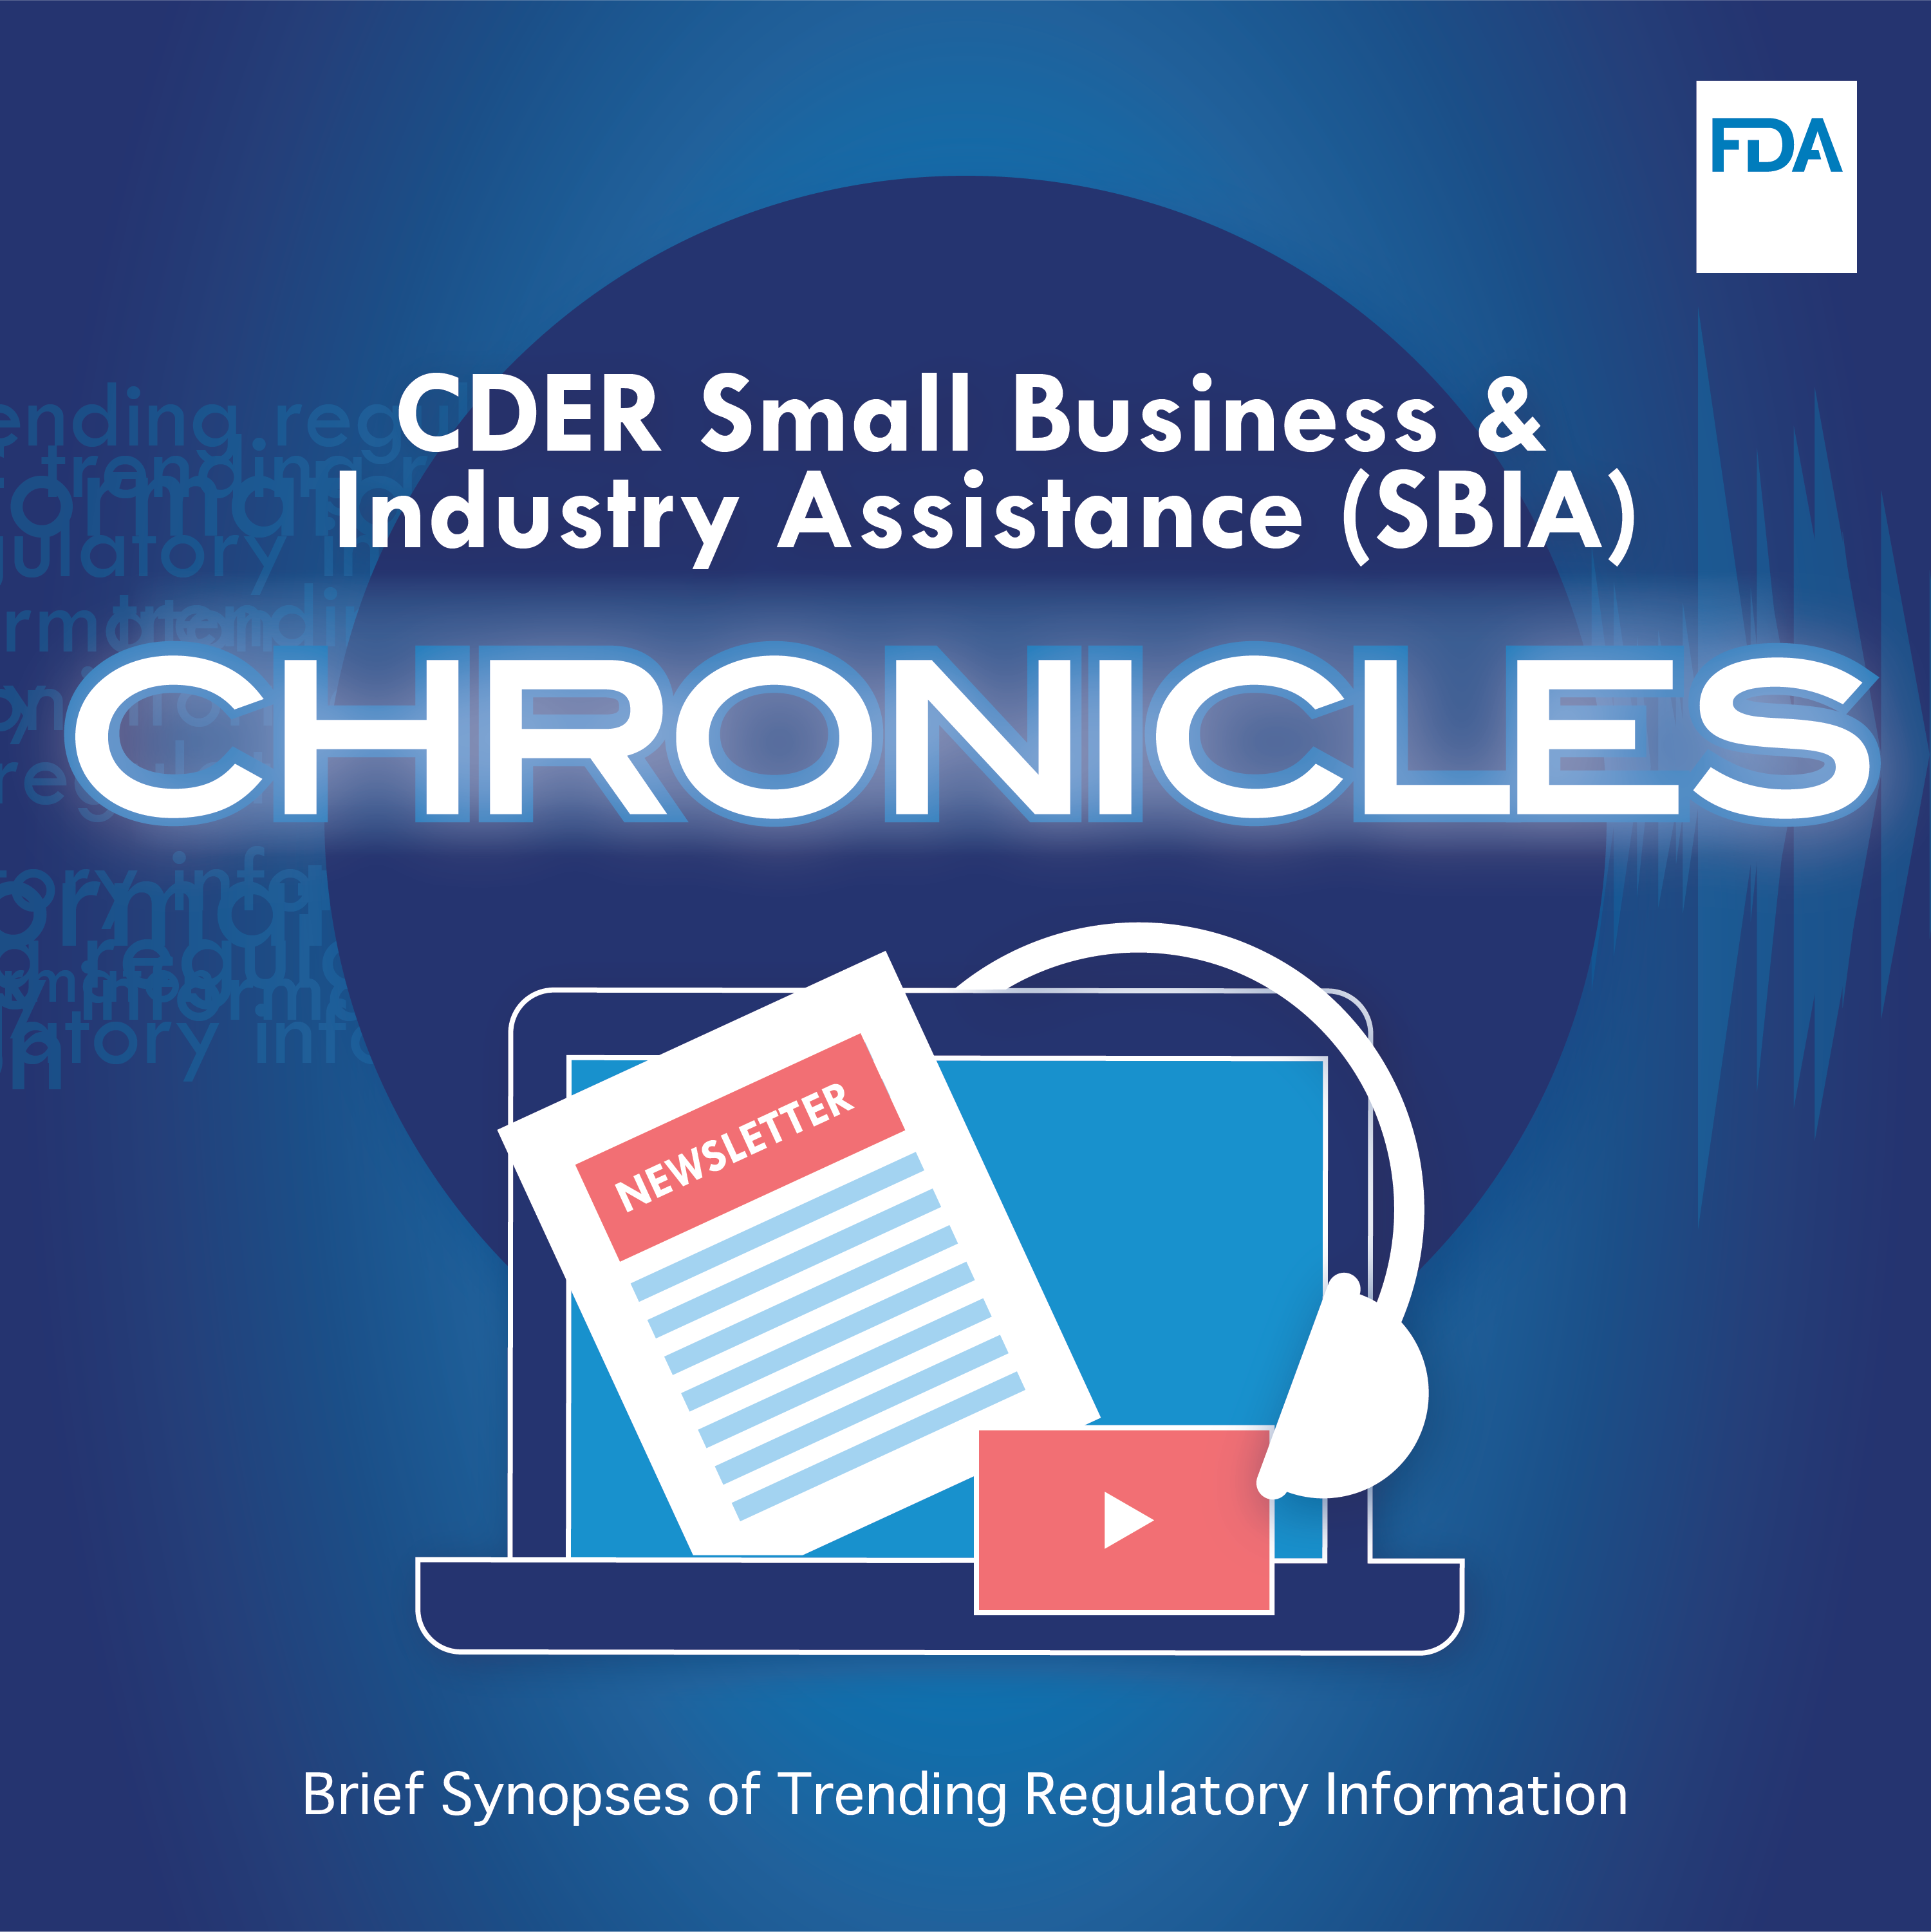 CDER Small Business & Industry Assistance (SBIA) Chronicles